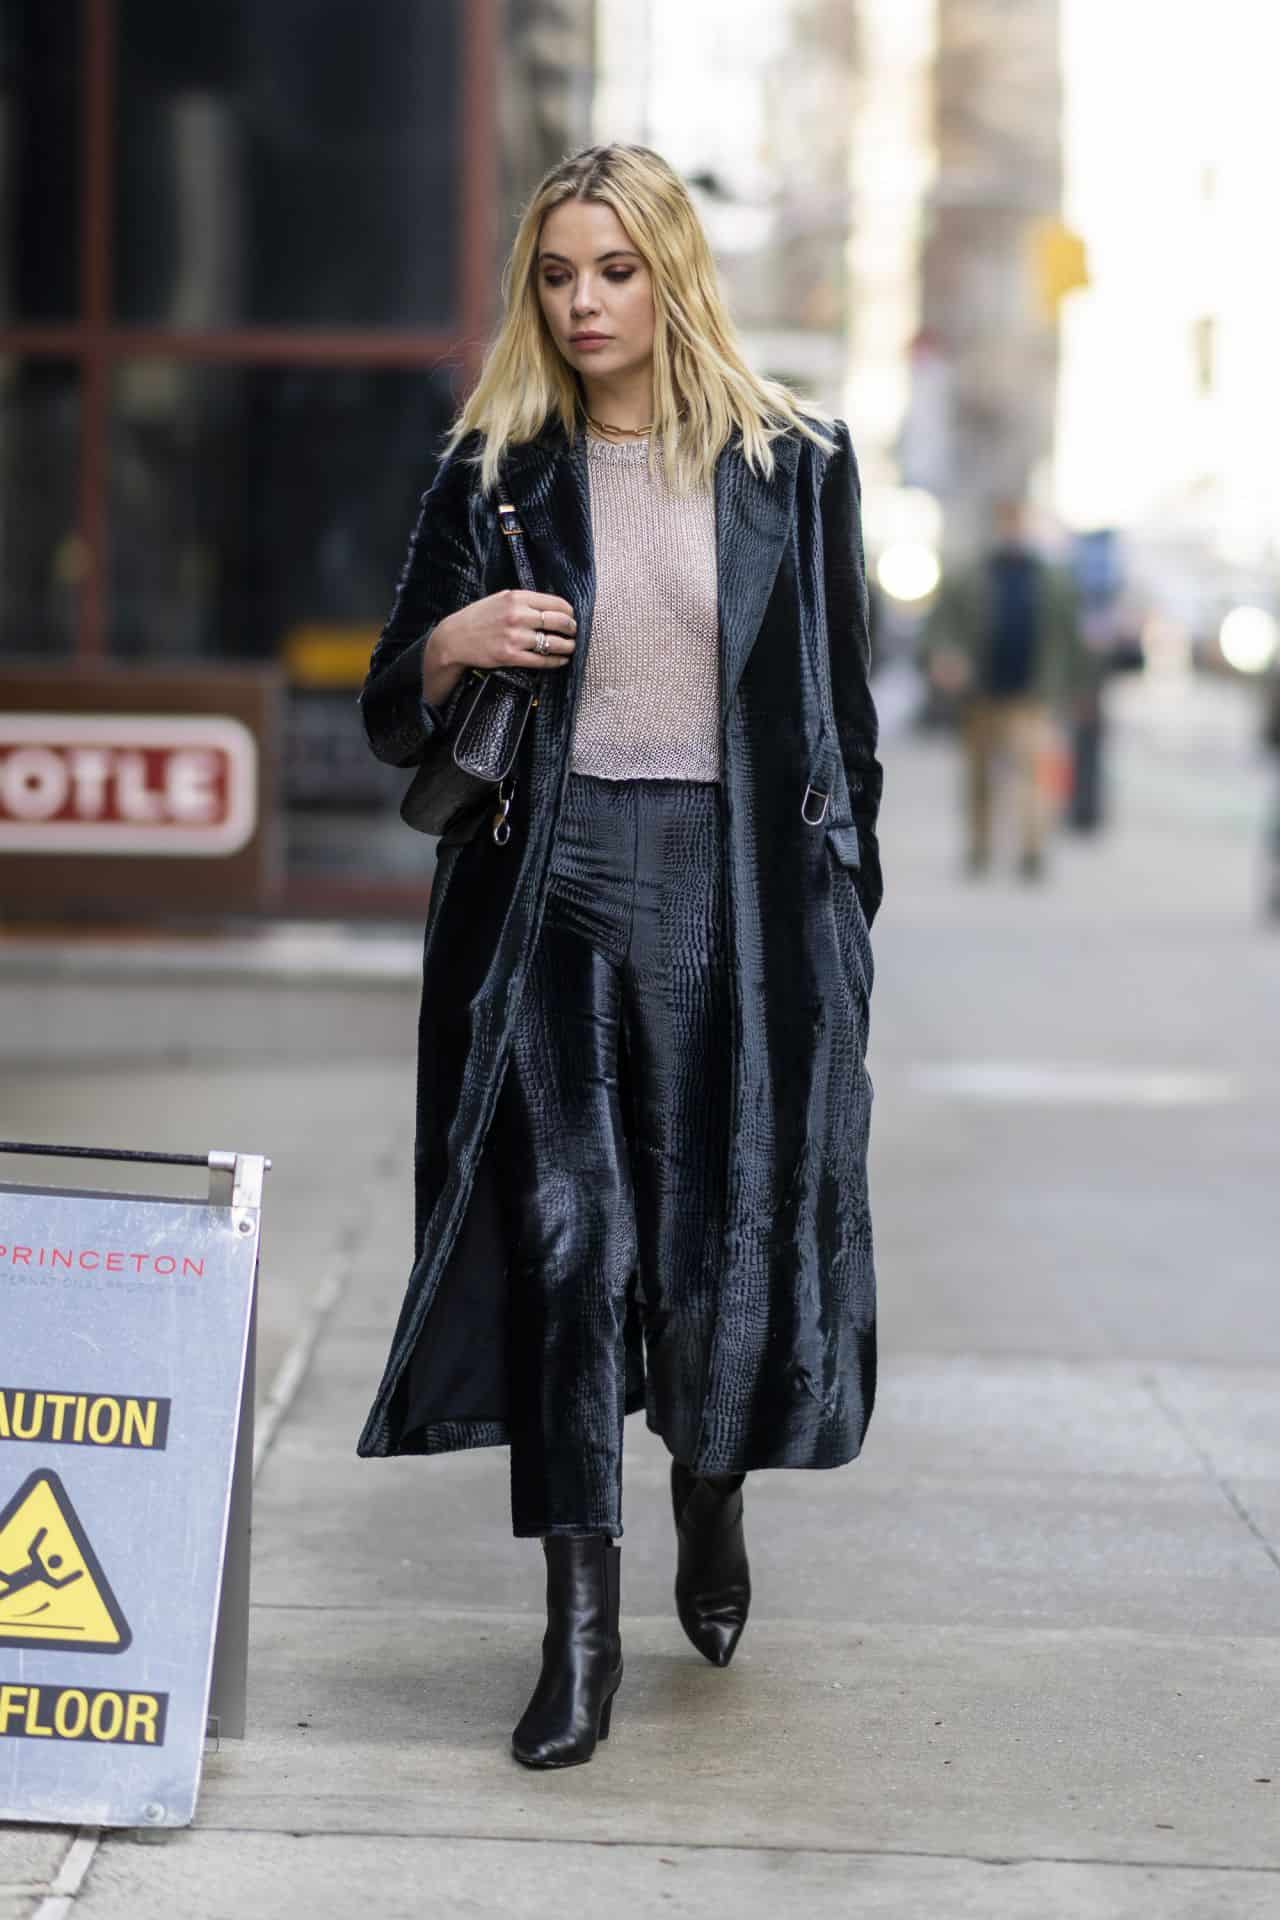 Ashley Benson Looks Chic as She Heads to a Business Meeting in New York City